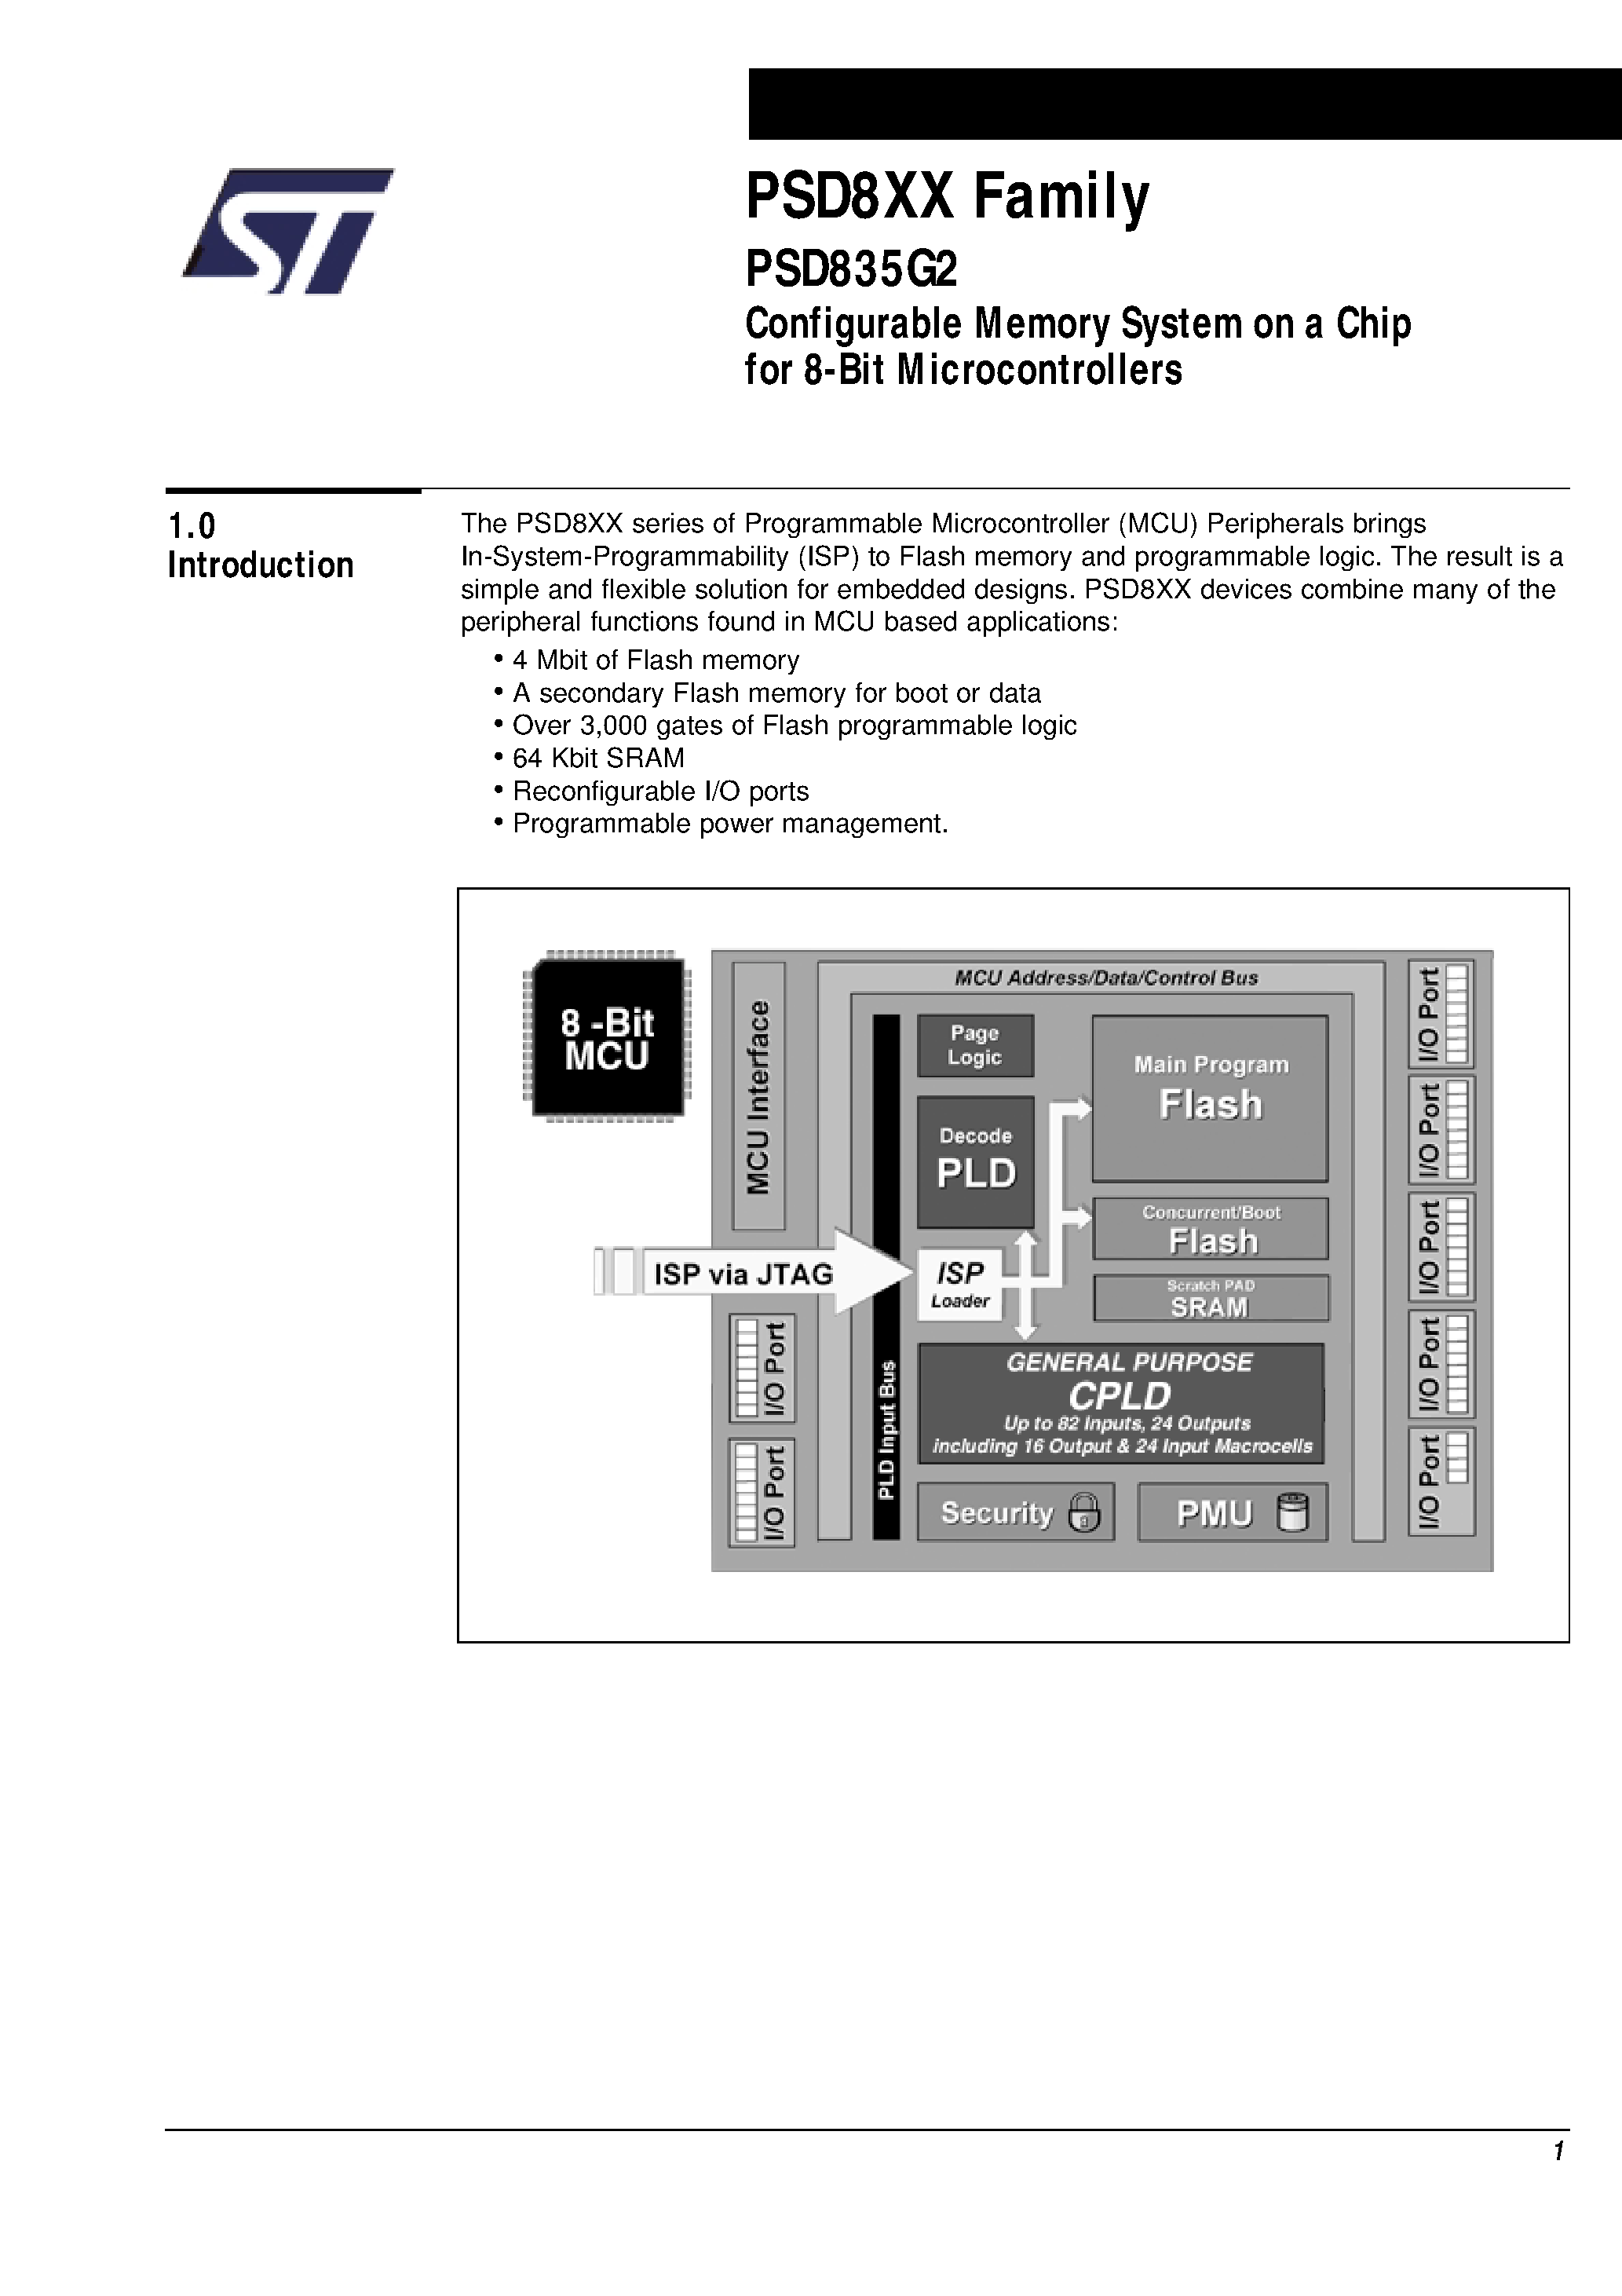 Datasheet PSD835F1V-A-90JI - Configurable Memory System on a Chip for 8-Bit Microcontrollers page 2